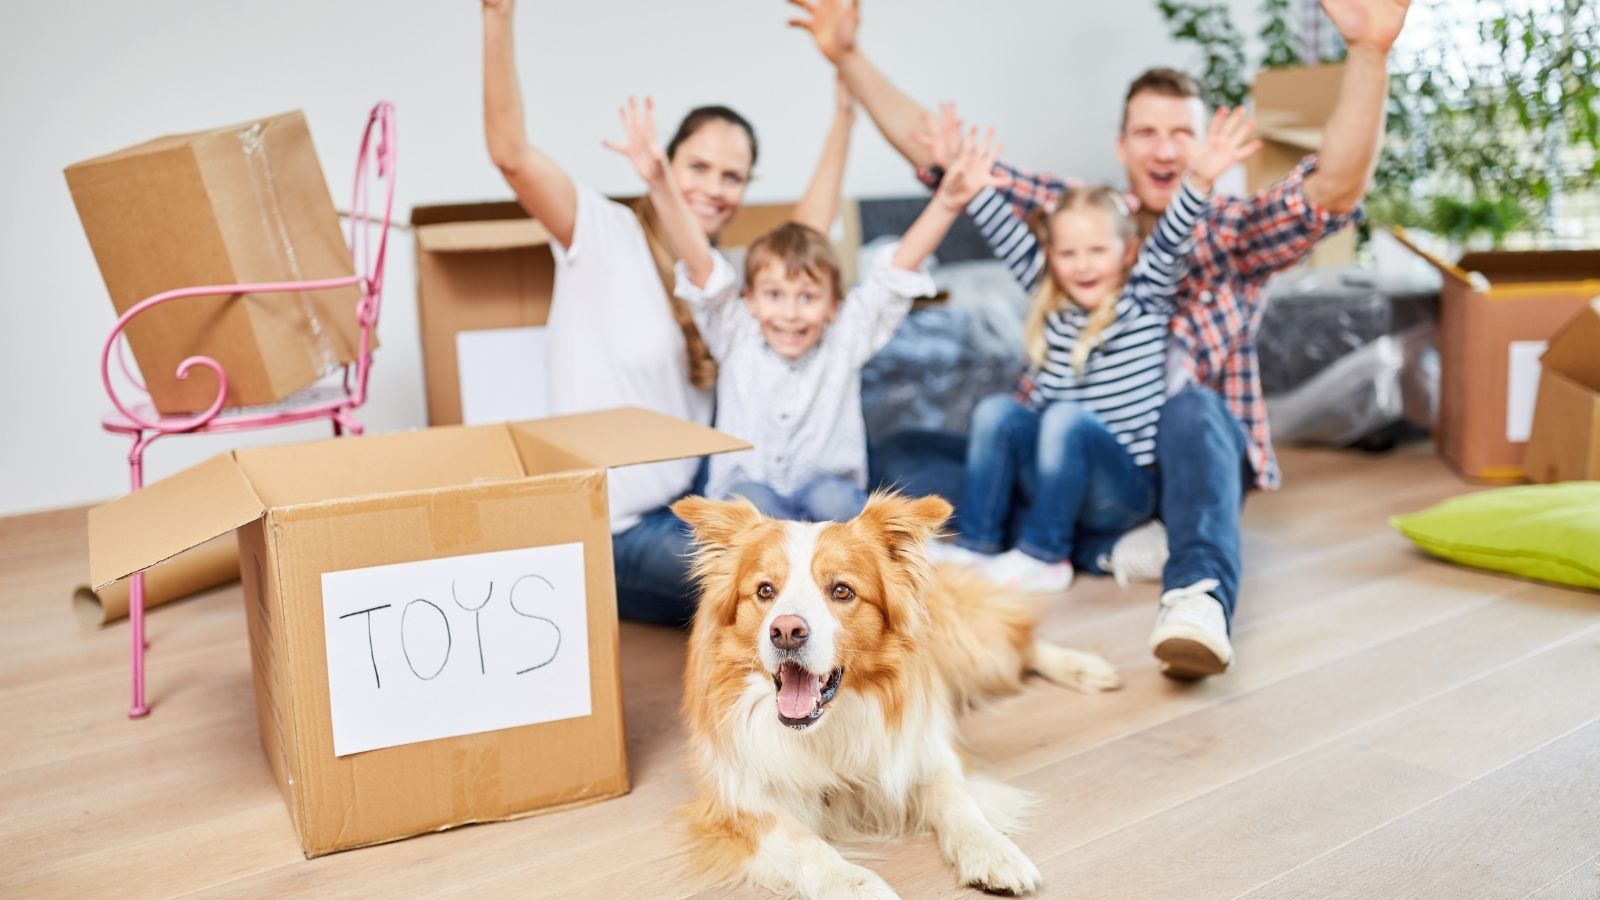 Keep Kids and Pets Busy, Moving Hacks